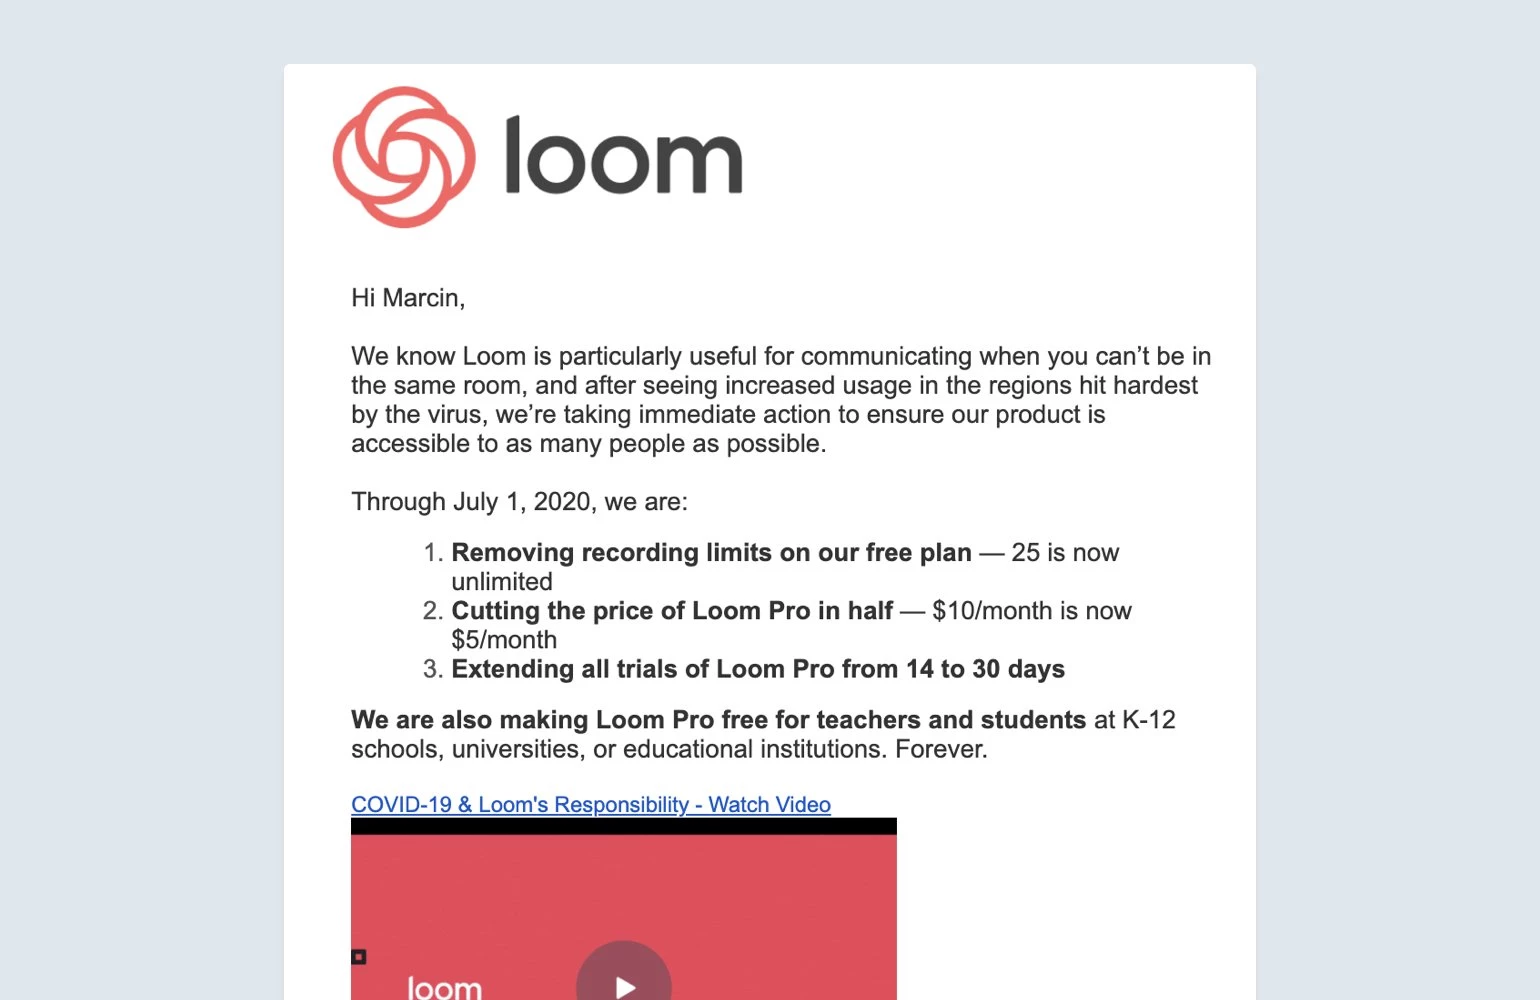 loom email communication example during uncertain times